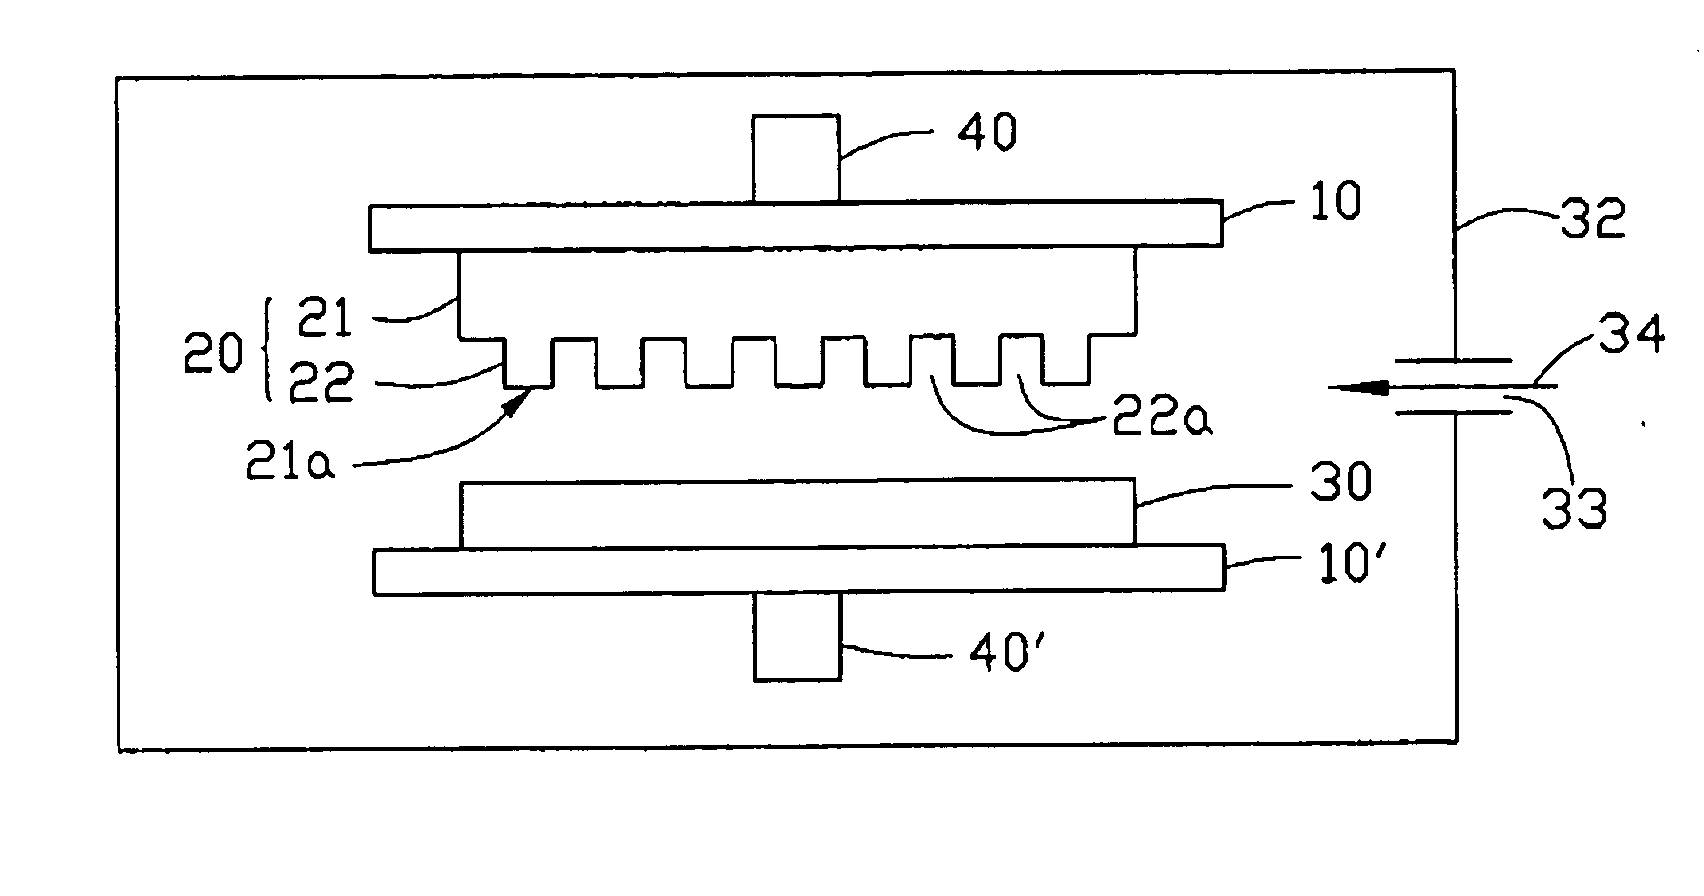 Apparatus for hot embossing lithography